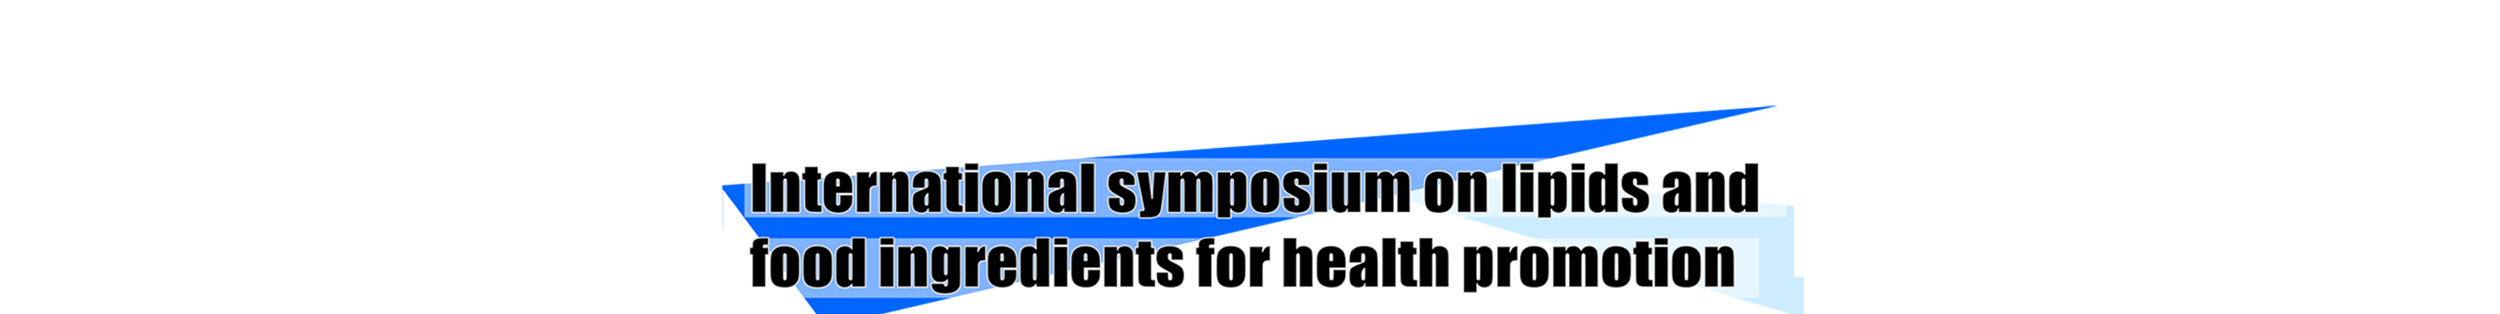 International symposium on lipids  and food ingredients for health promotion